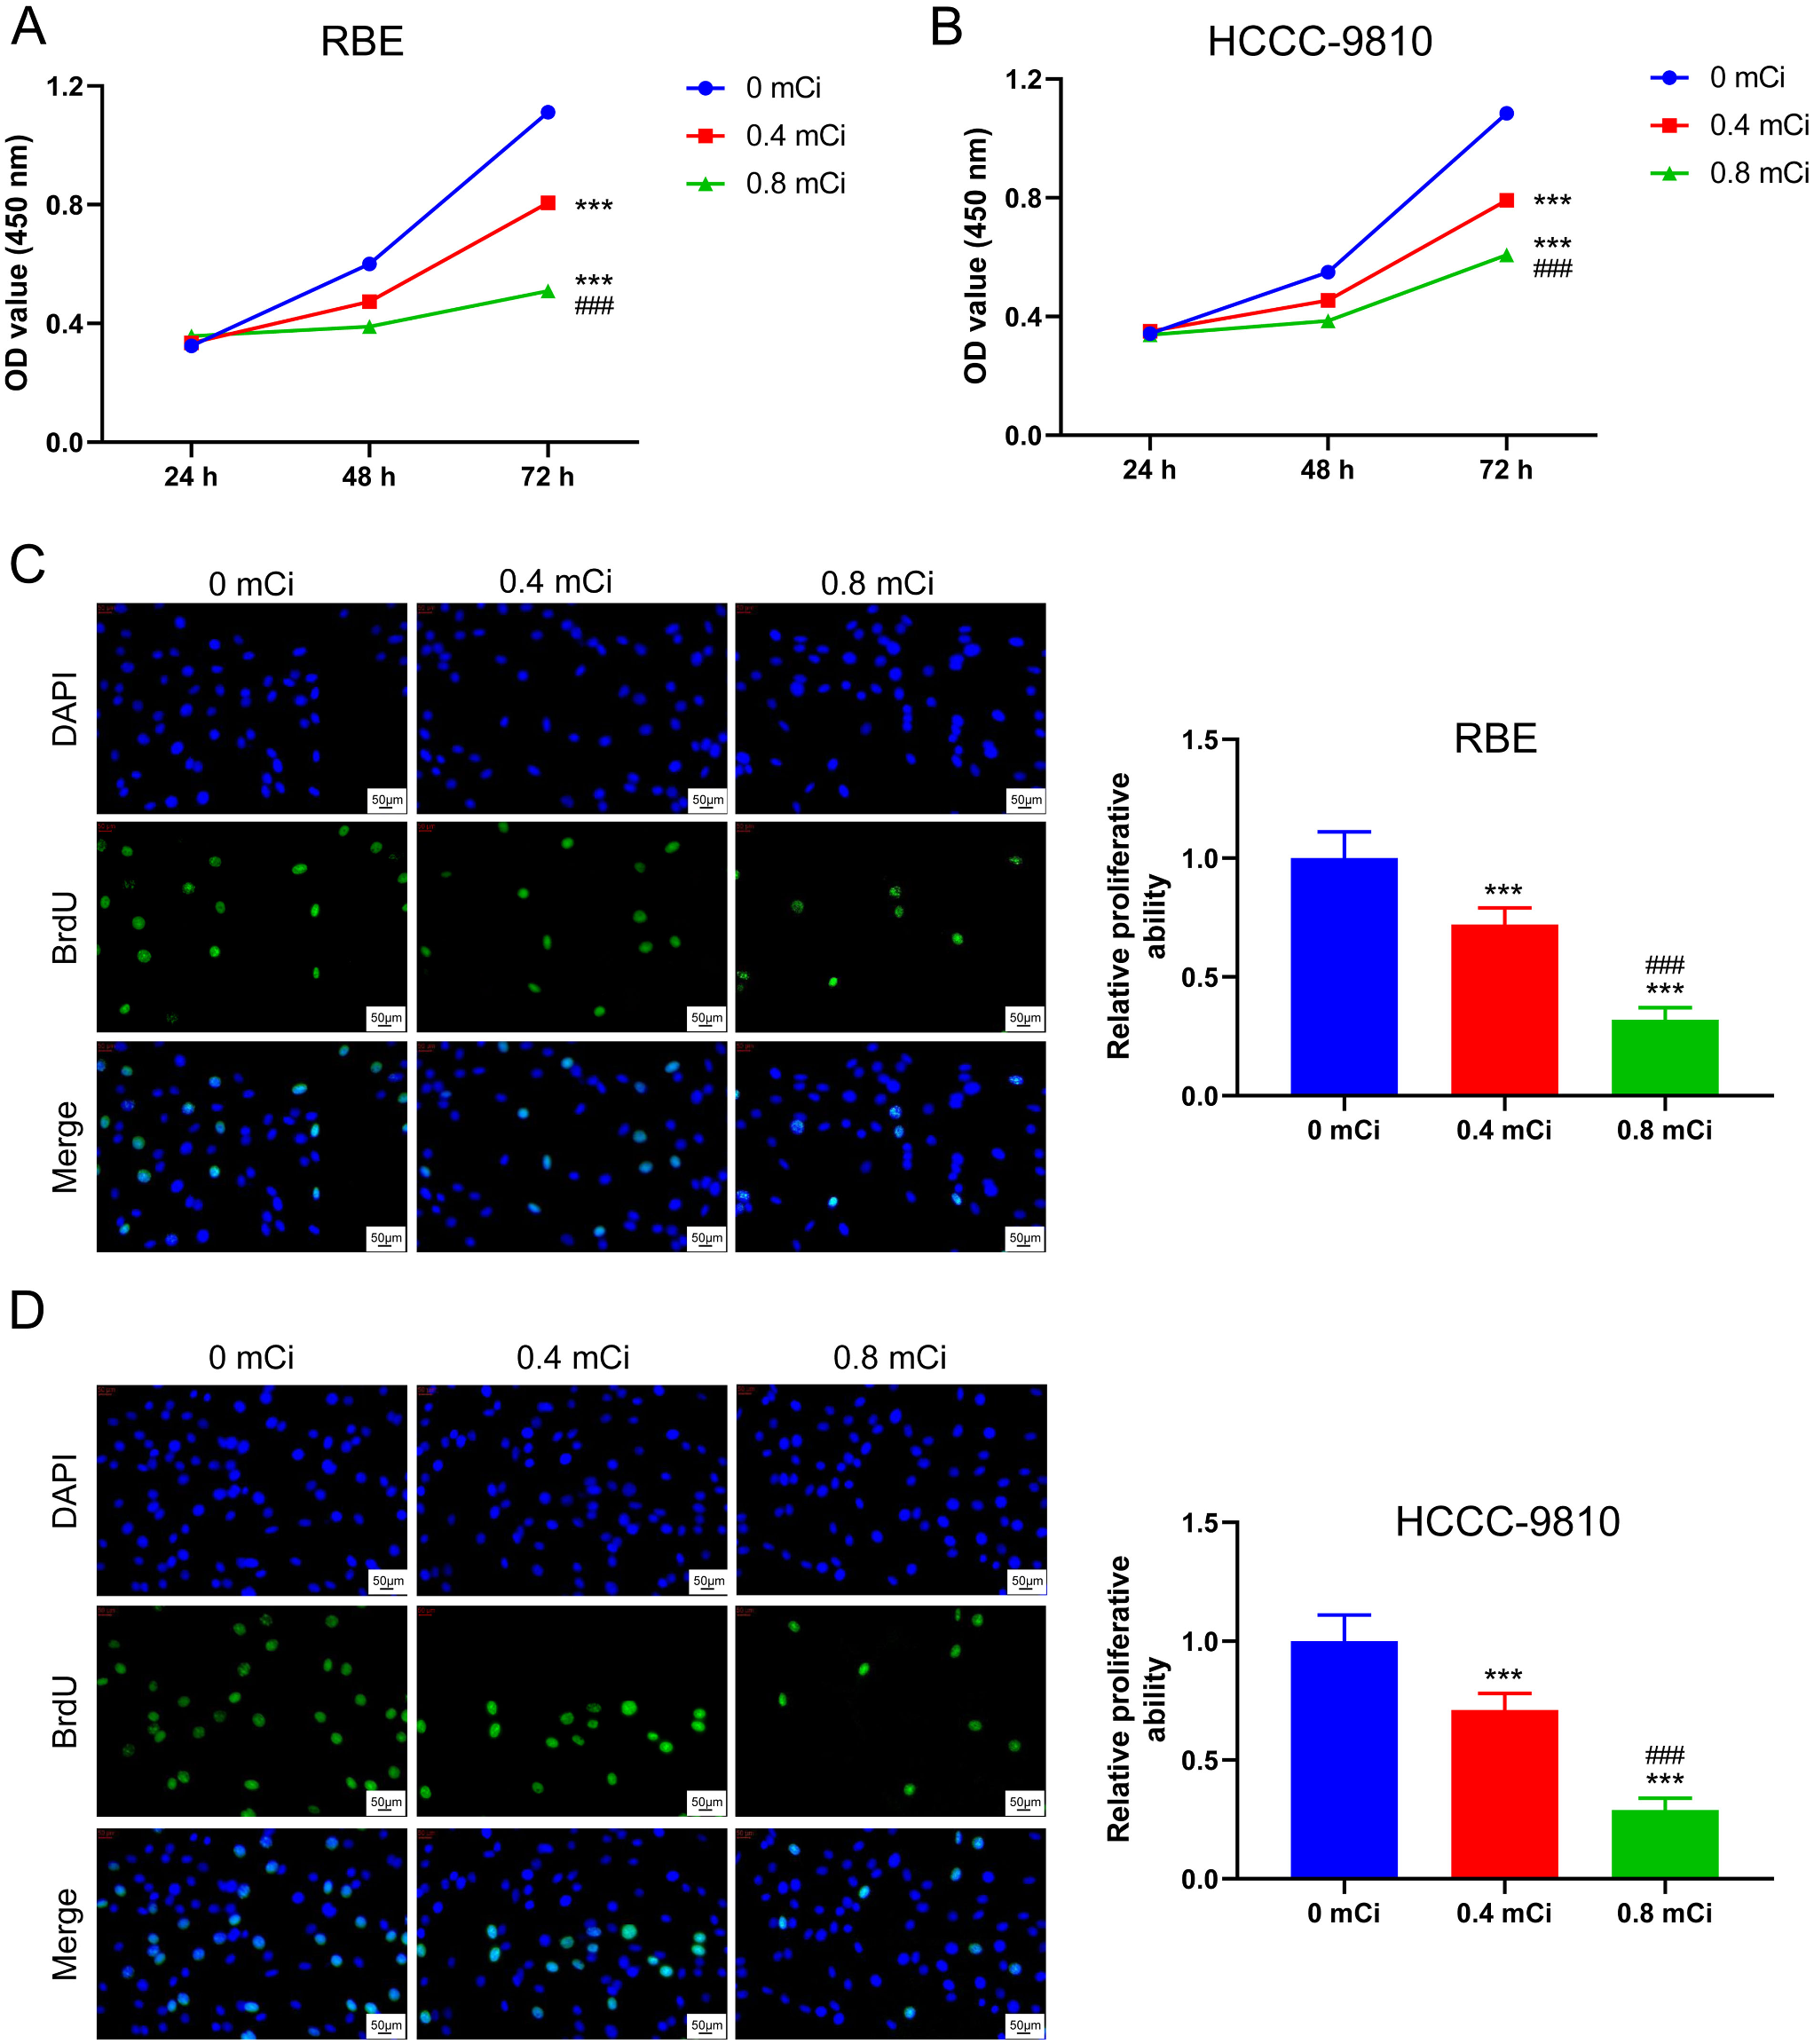 Iodine-125 seed inhibits proliferation and promotes apoptosis of cholangiocarcinoma cells by inducing the ROS/p53 axis